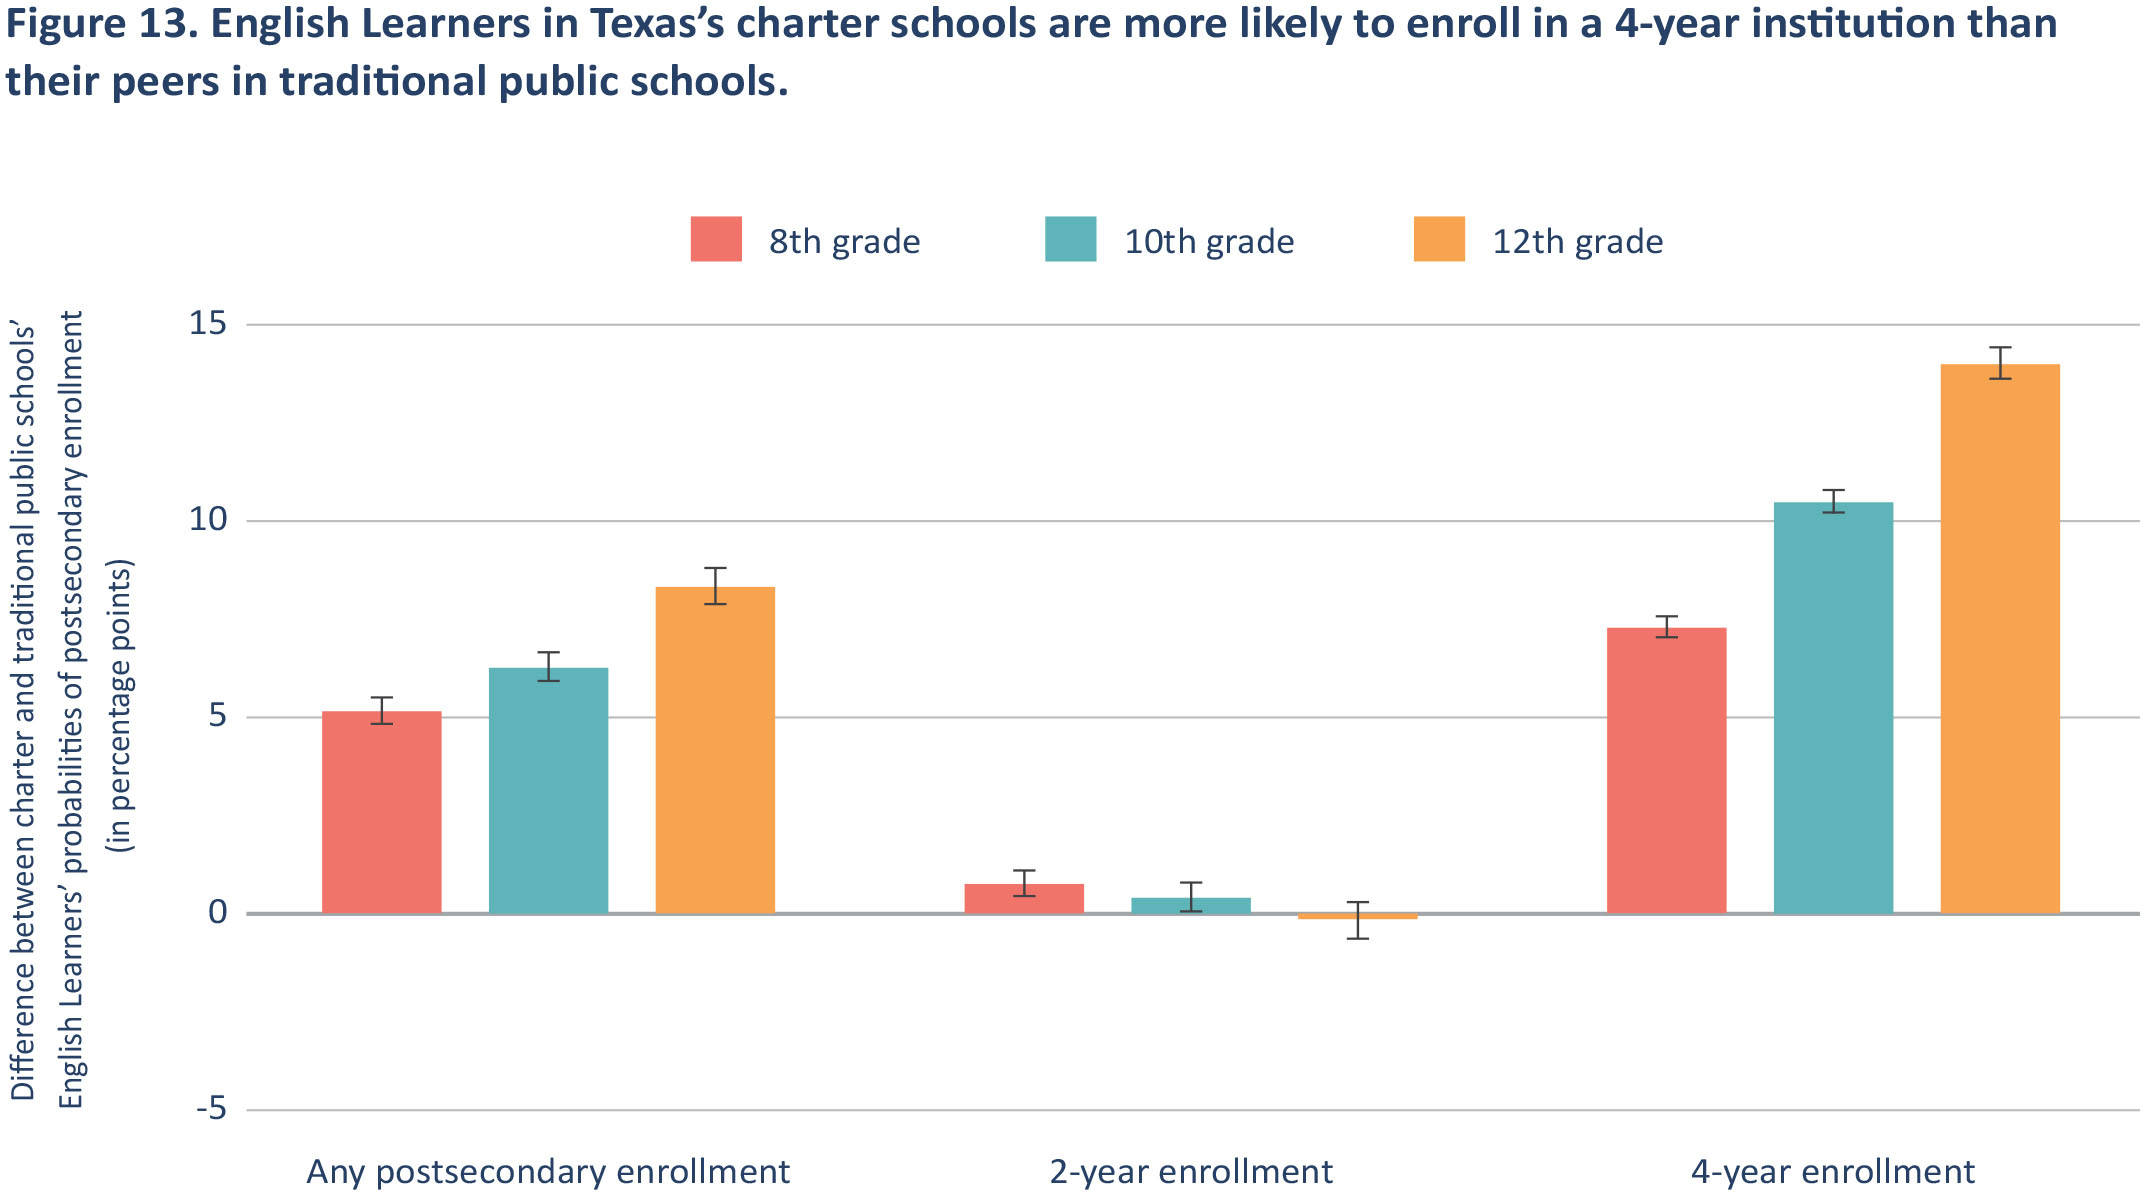 Figure 13. English Learners in Texas's charter schools are more likely to enroll in a 4-year institution than their peers in traditional public schools.